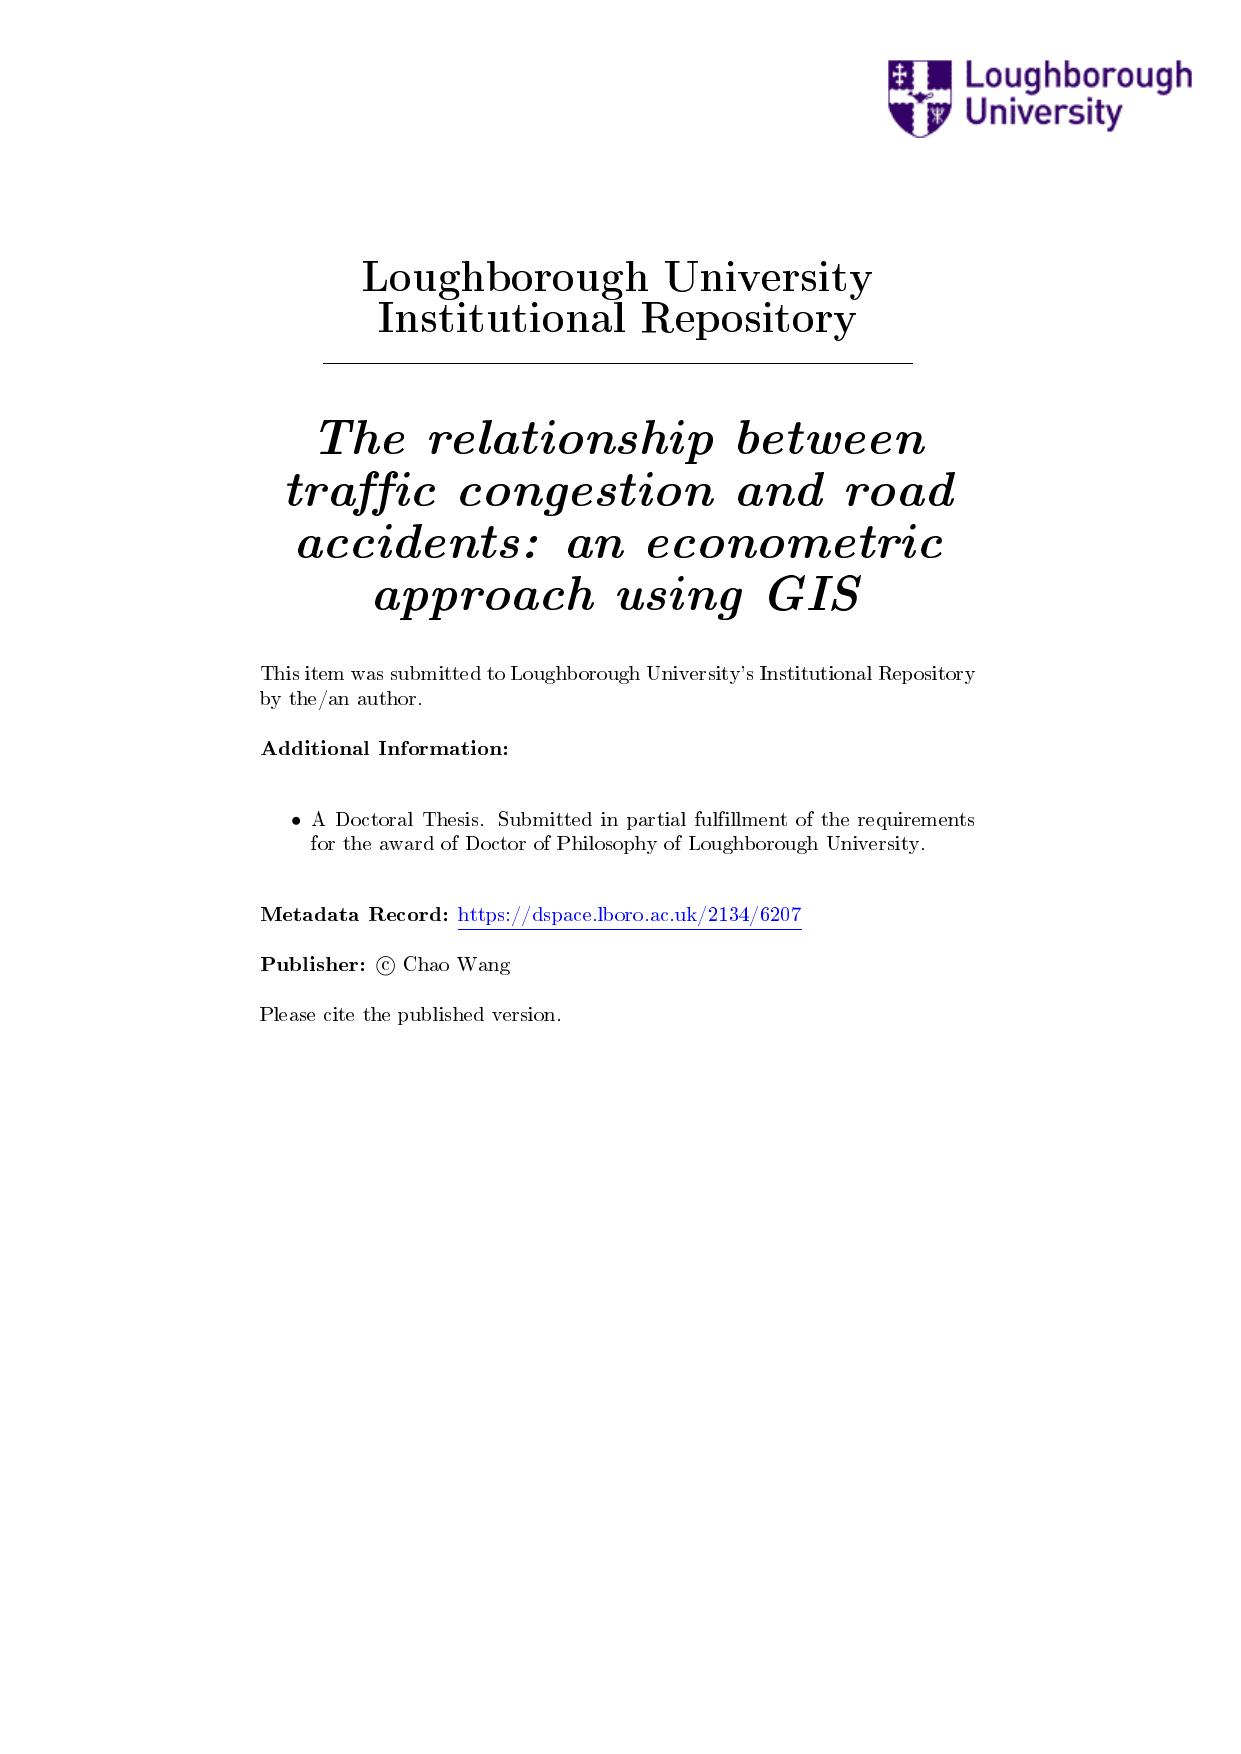 The relationship between traffic congestion and road accident using GIS for economic impact evaluation 2010